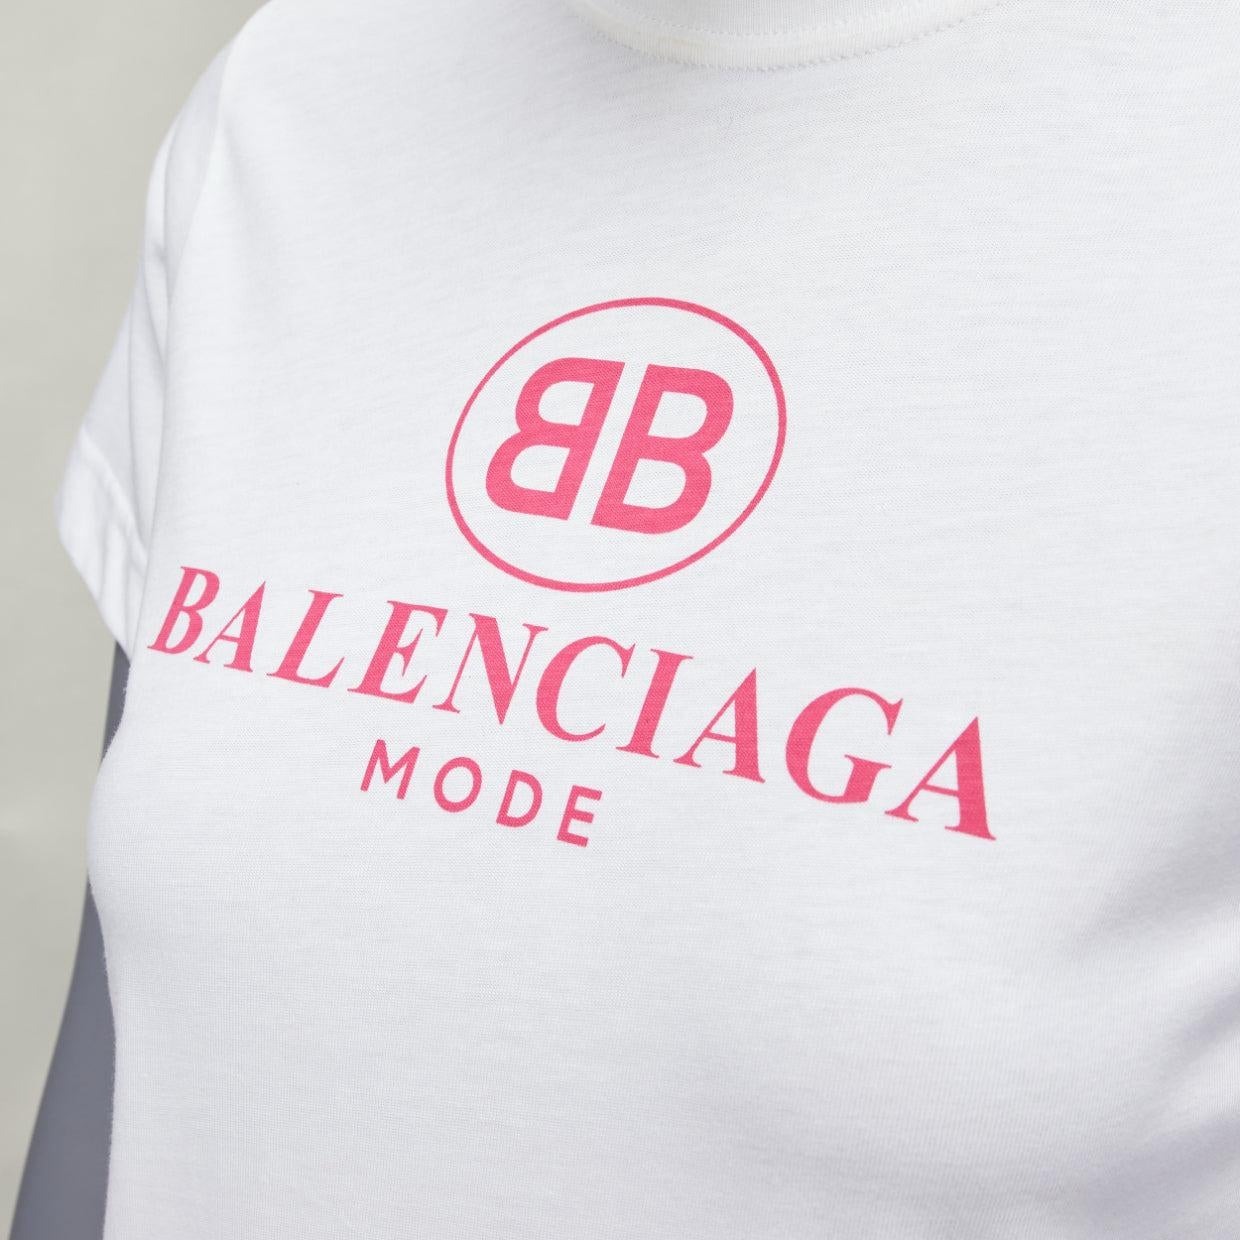 BALENCIAGA 2017 Mode pink logo print short sleeve white cotton tshirt XS
Reference: AAWC/A00761
Brand: Balenciaga
Designer: Demna
Collection: 2017
Material: Cotton
Color: White, Pink
Pattern: Solid
Made in: Portugal

CONDITION:
Condition: Fair, this